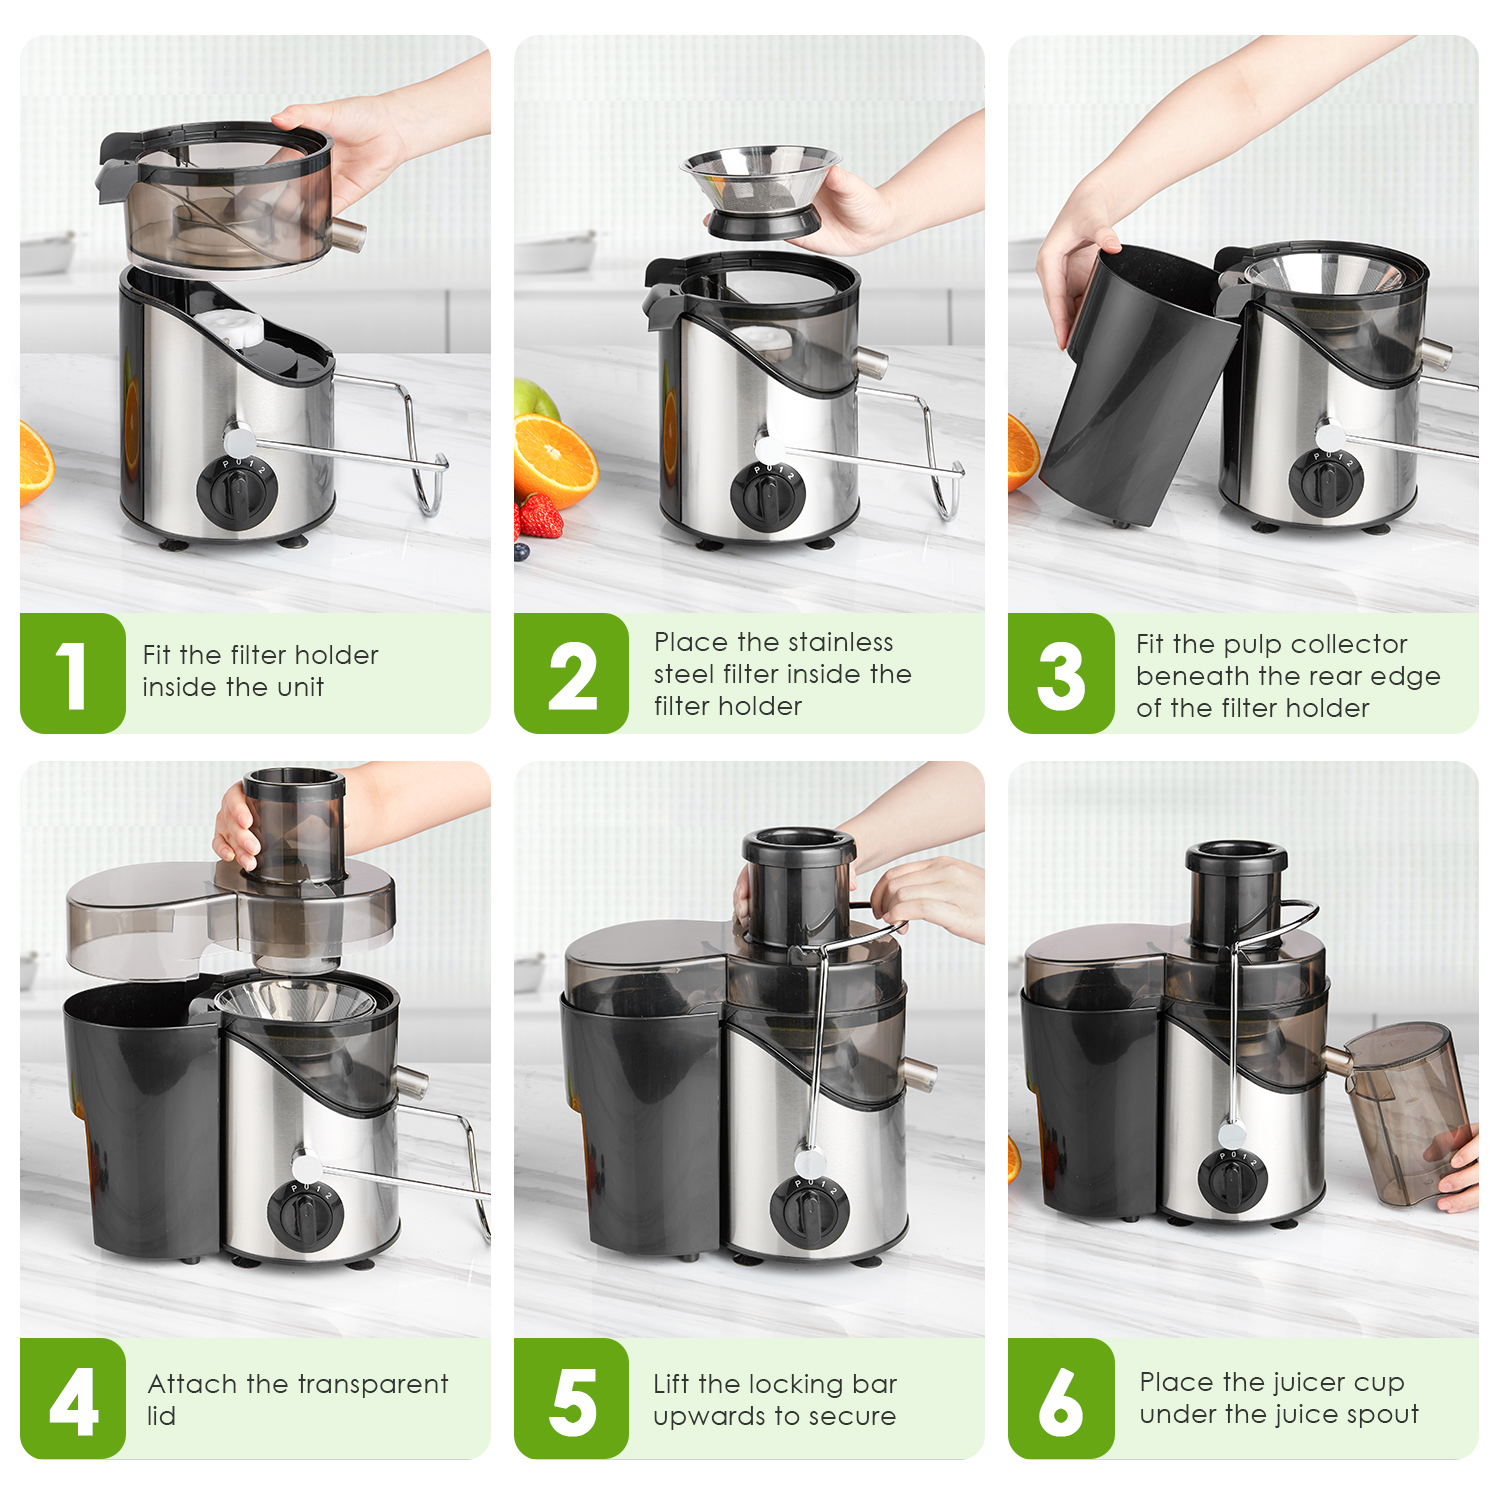 Juicer Extractor Easy Clean, 3 Speeds Control, Stainless Steel BPA Free - image 3 of 9